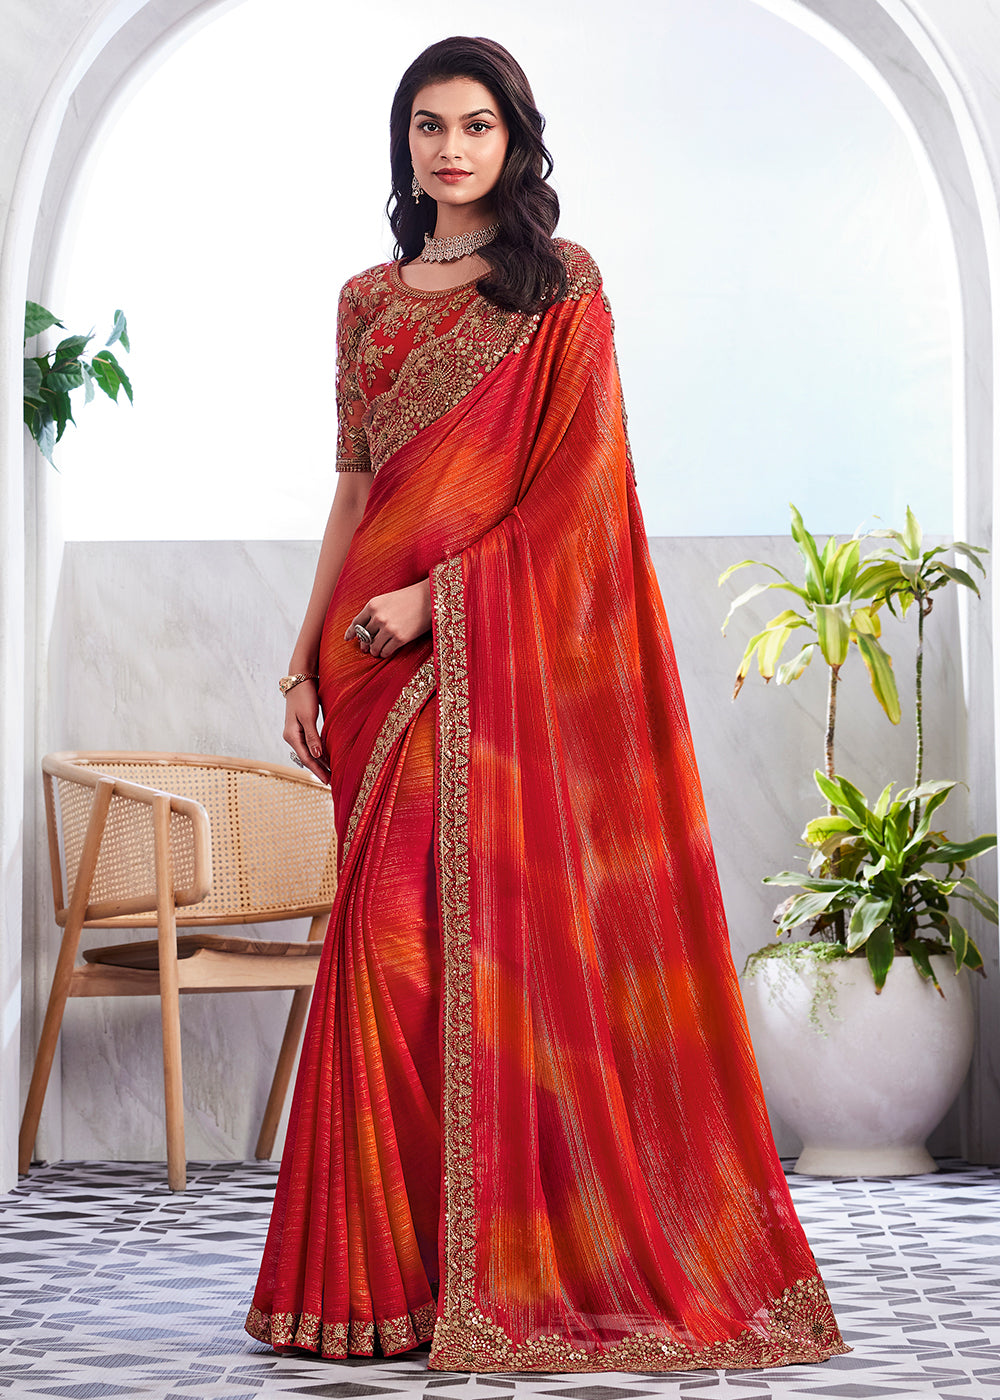 Buy Now Lovely Orange Red Silk Embroidered Designer Saree Online in USA, UK, Canada & Worldwide at Empress Clothing. 